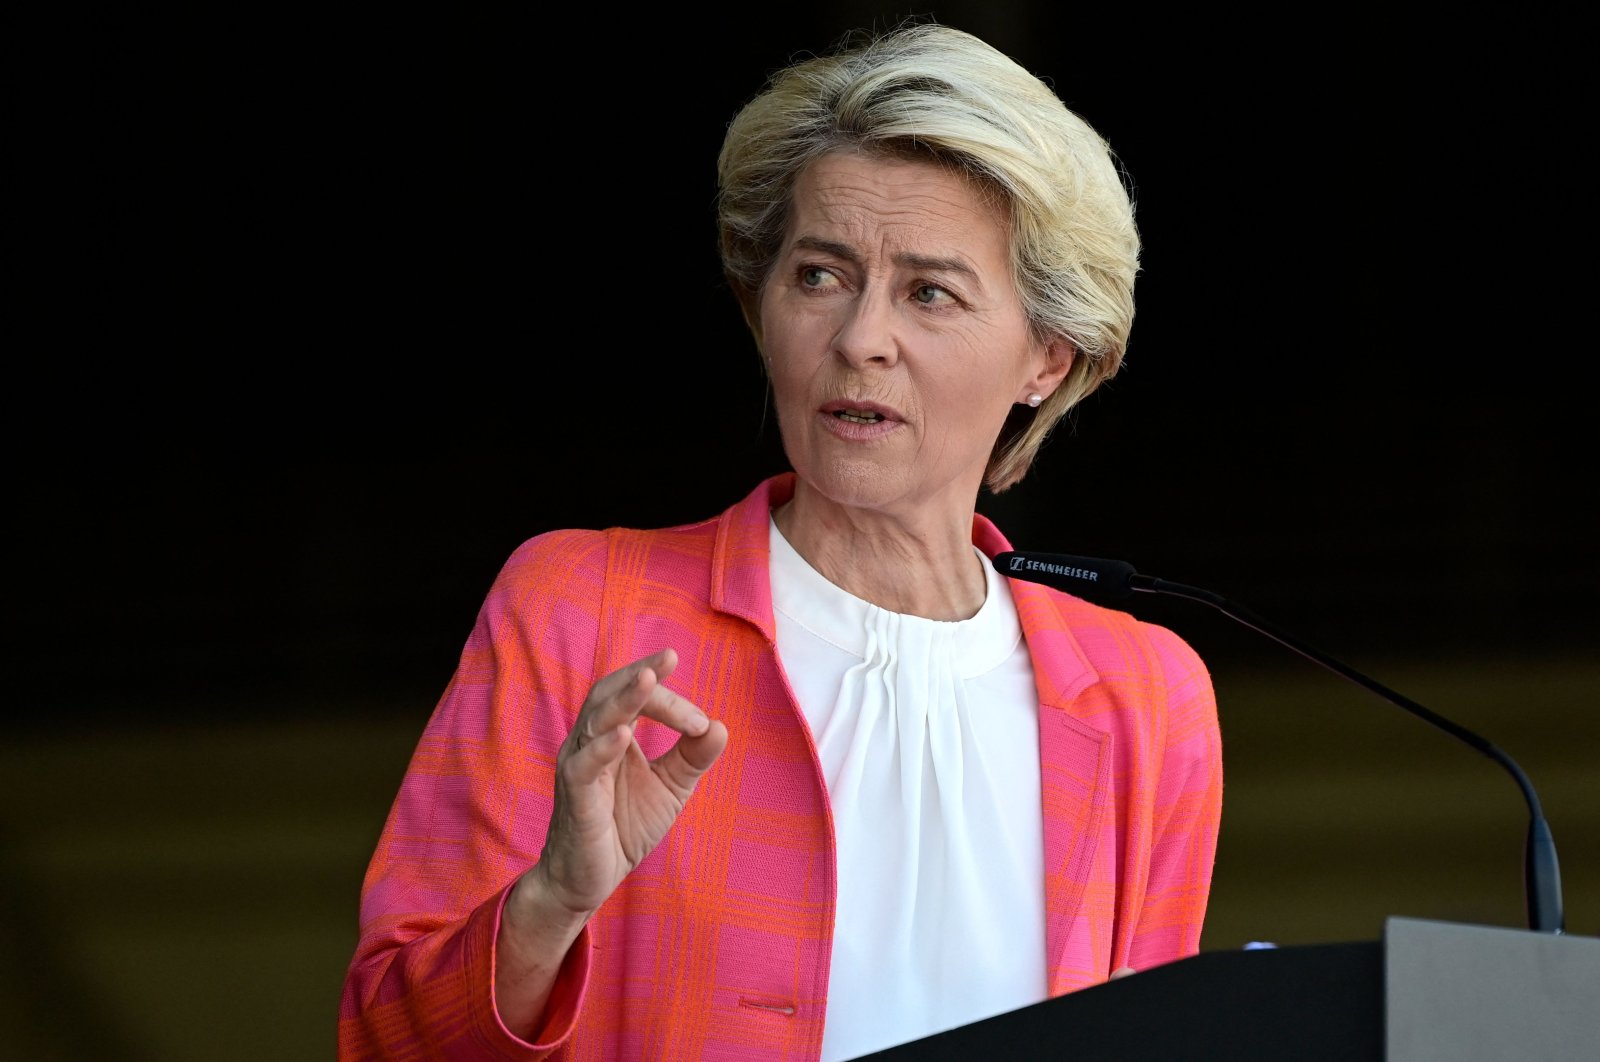 European Commission President Ursula von der Leyen gives a joint press conference with the Spanish prime minister and the European Council president as they visit a reception center for Afghan refugees who worked for the European bloc at the Torrejon de Ardoz military airbase near Madrid, Spain, Aug. 21, 2021. (AFP Photo)